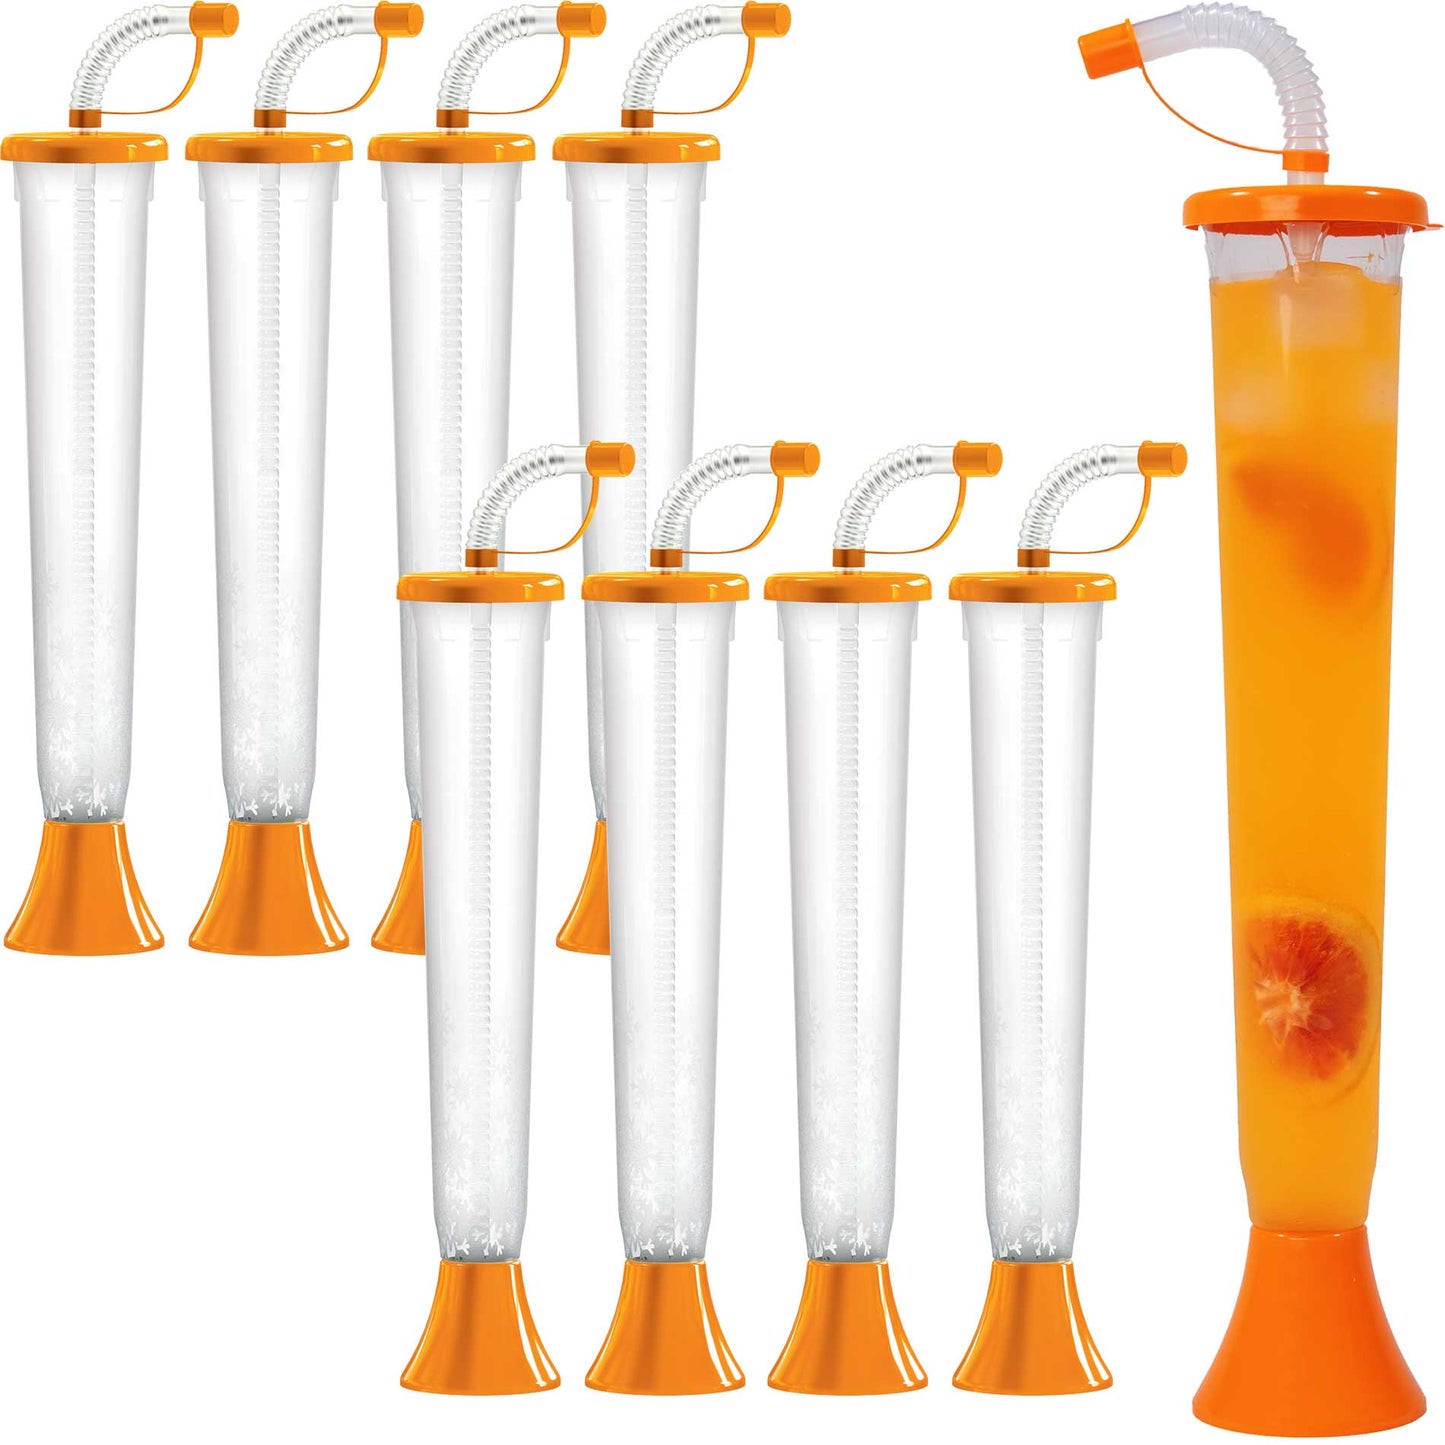 https://noveltycupsusa.com/cdn/shop/files/sweet-world-usa-yard-cups-54-or-108-cups-yard-cups-with-orange-lids-and-straws-14oz-for-margaritas-and-frozen-drinks-cups-with-lids-and-straws-35523663397023.jpg?v=1684775674&width=1445